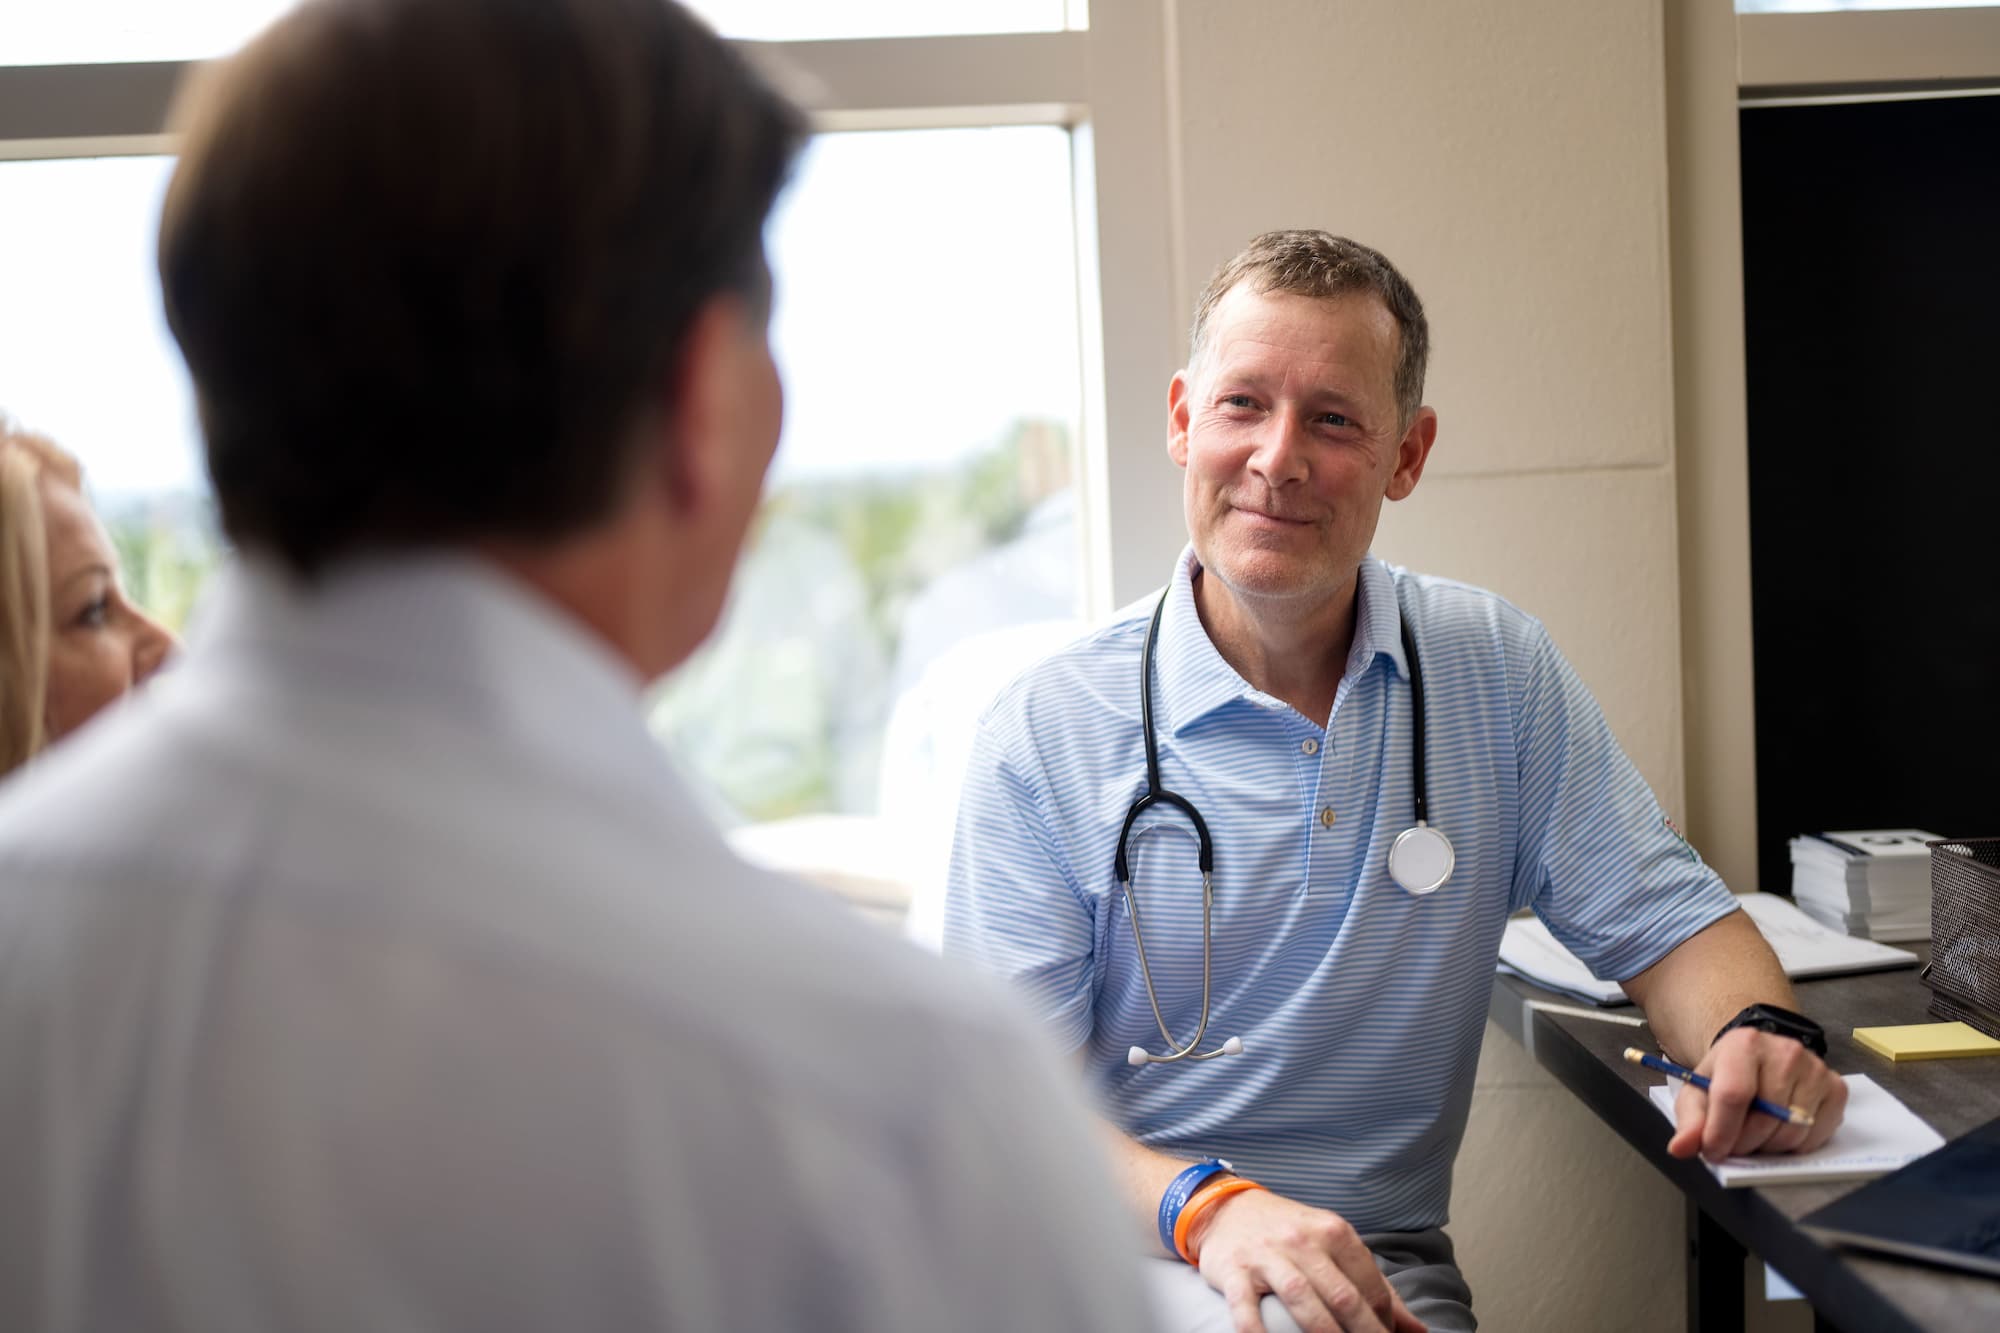 Generic photo of a doctor speaking with a patient.